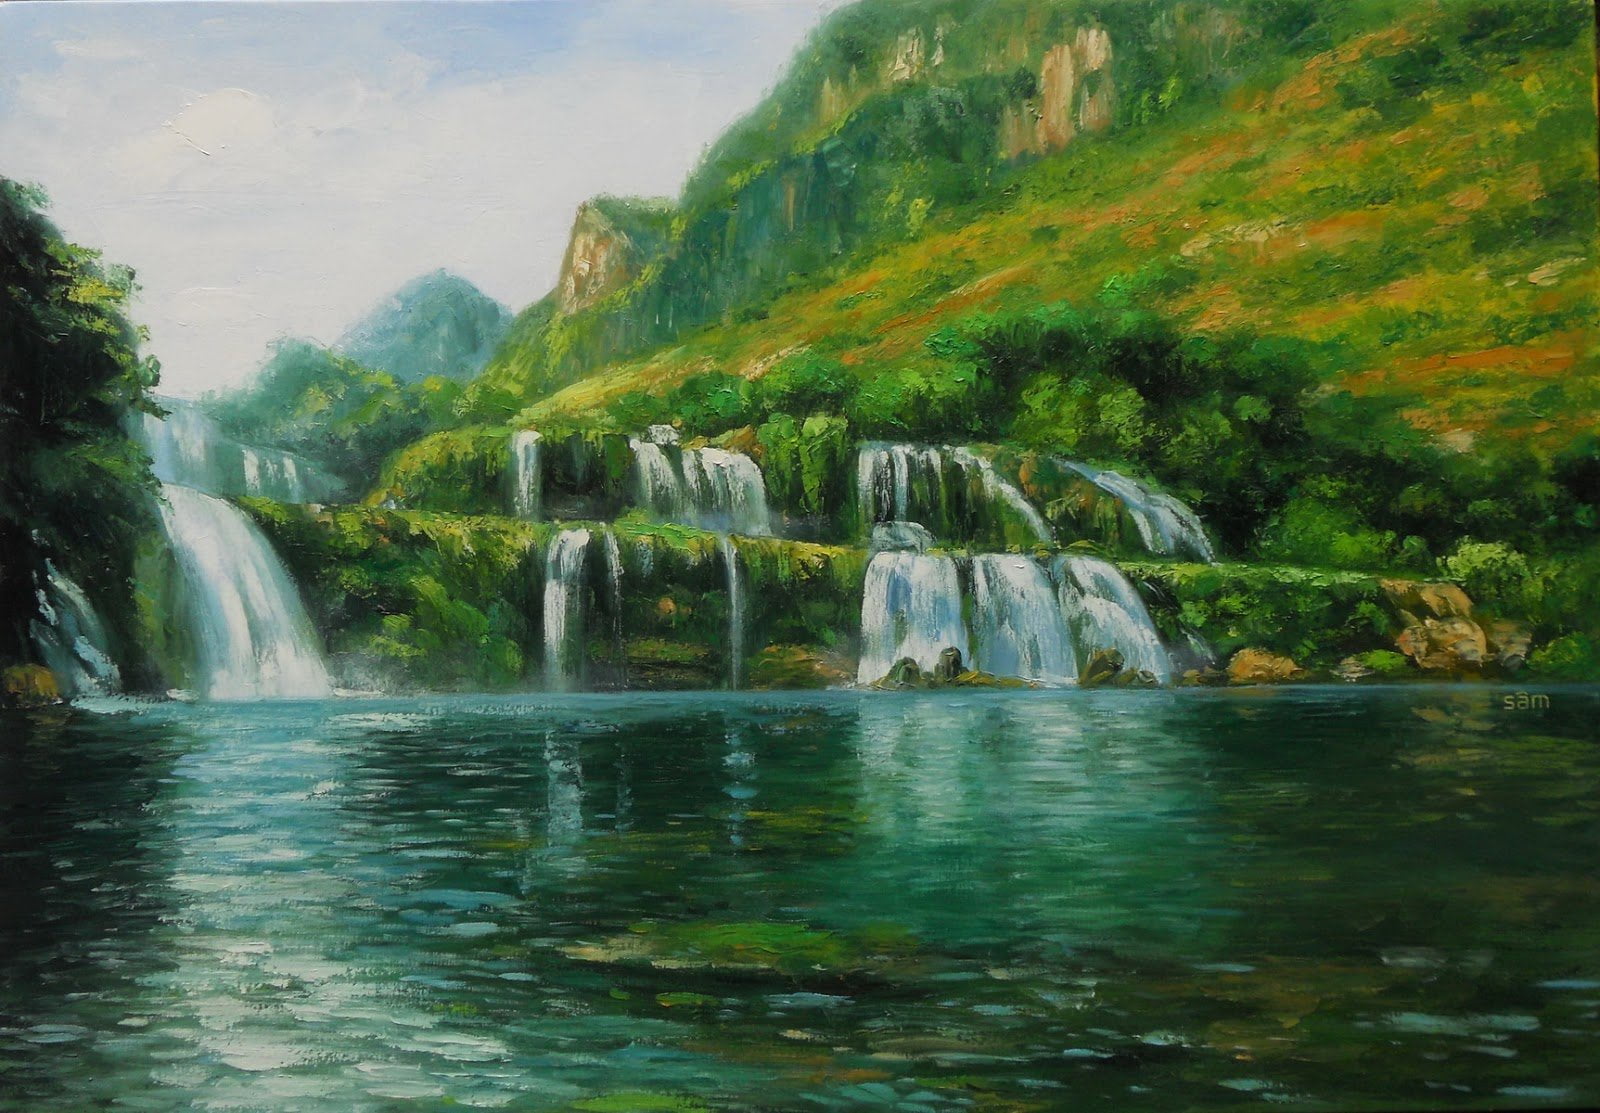 Oil painting of Ban Gioc waterfall by artist Le Sam